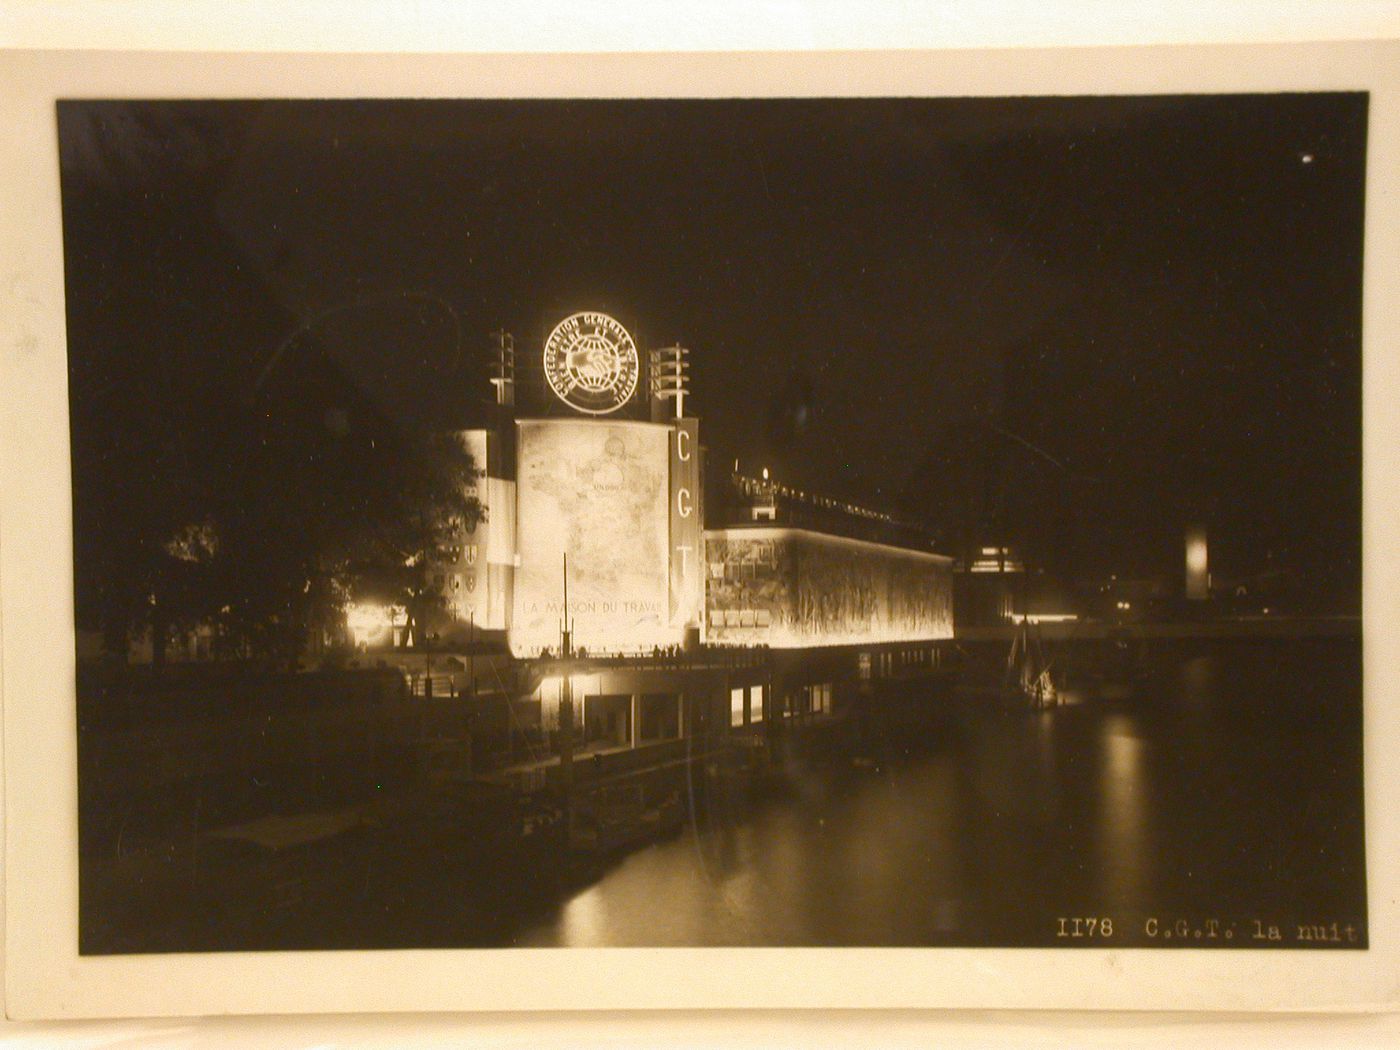 Night view of the Pavillon du Travail (also known as the Palais du Travail) with the Seine in the foreground, 1937 Exposition internationale, Paris, France